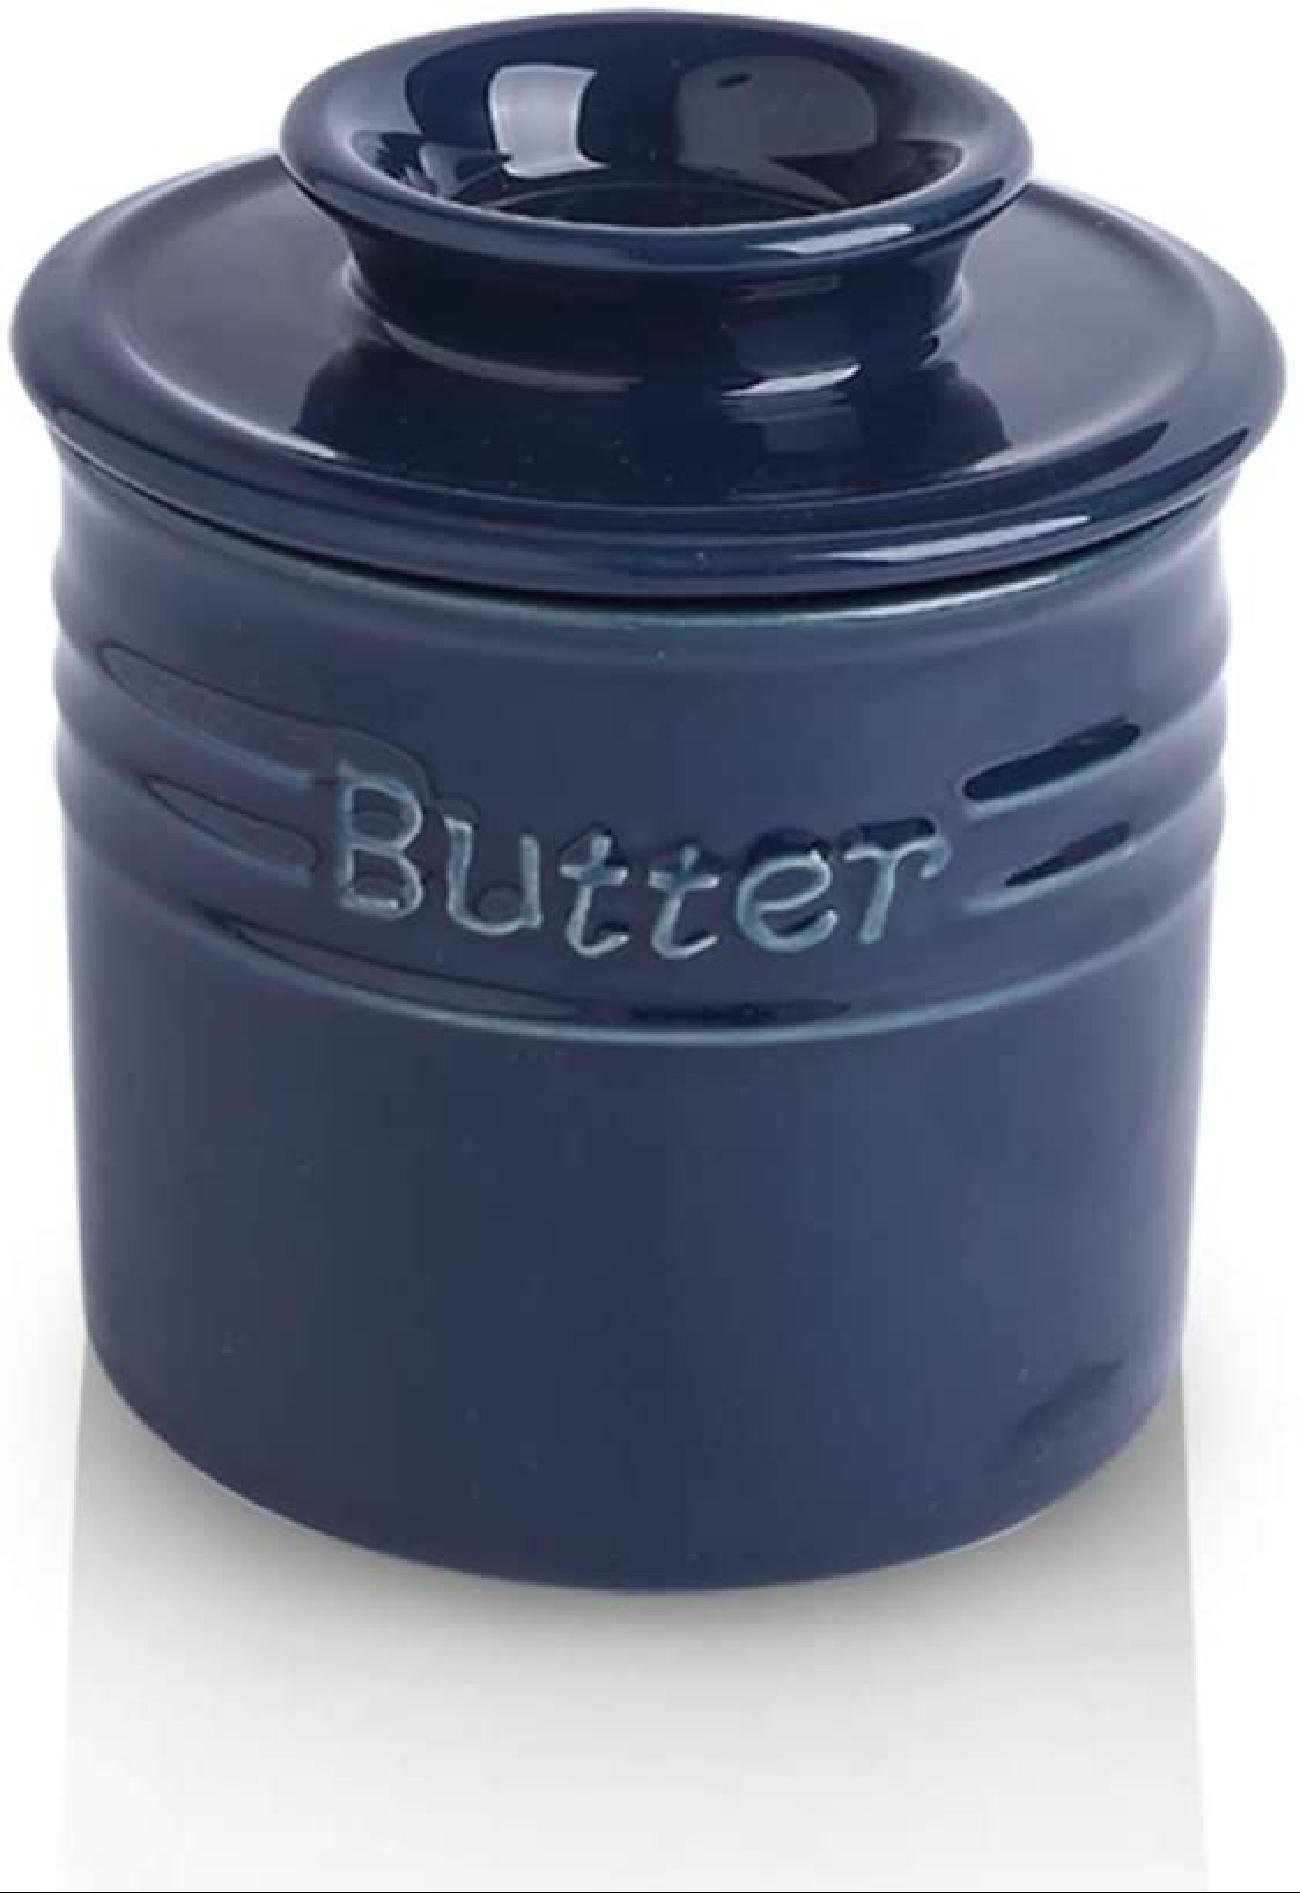 Blue French Butter Crock,Butter Crock,Soft Butter Container,Glass Butter Keeper,Fresh Soft Butter Without Refrigeration,Butter Dish With Lid for Countertop 